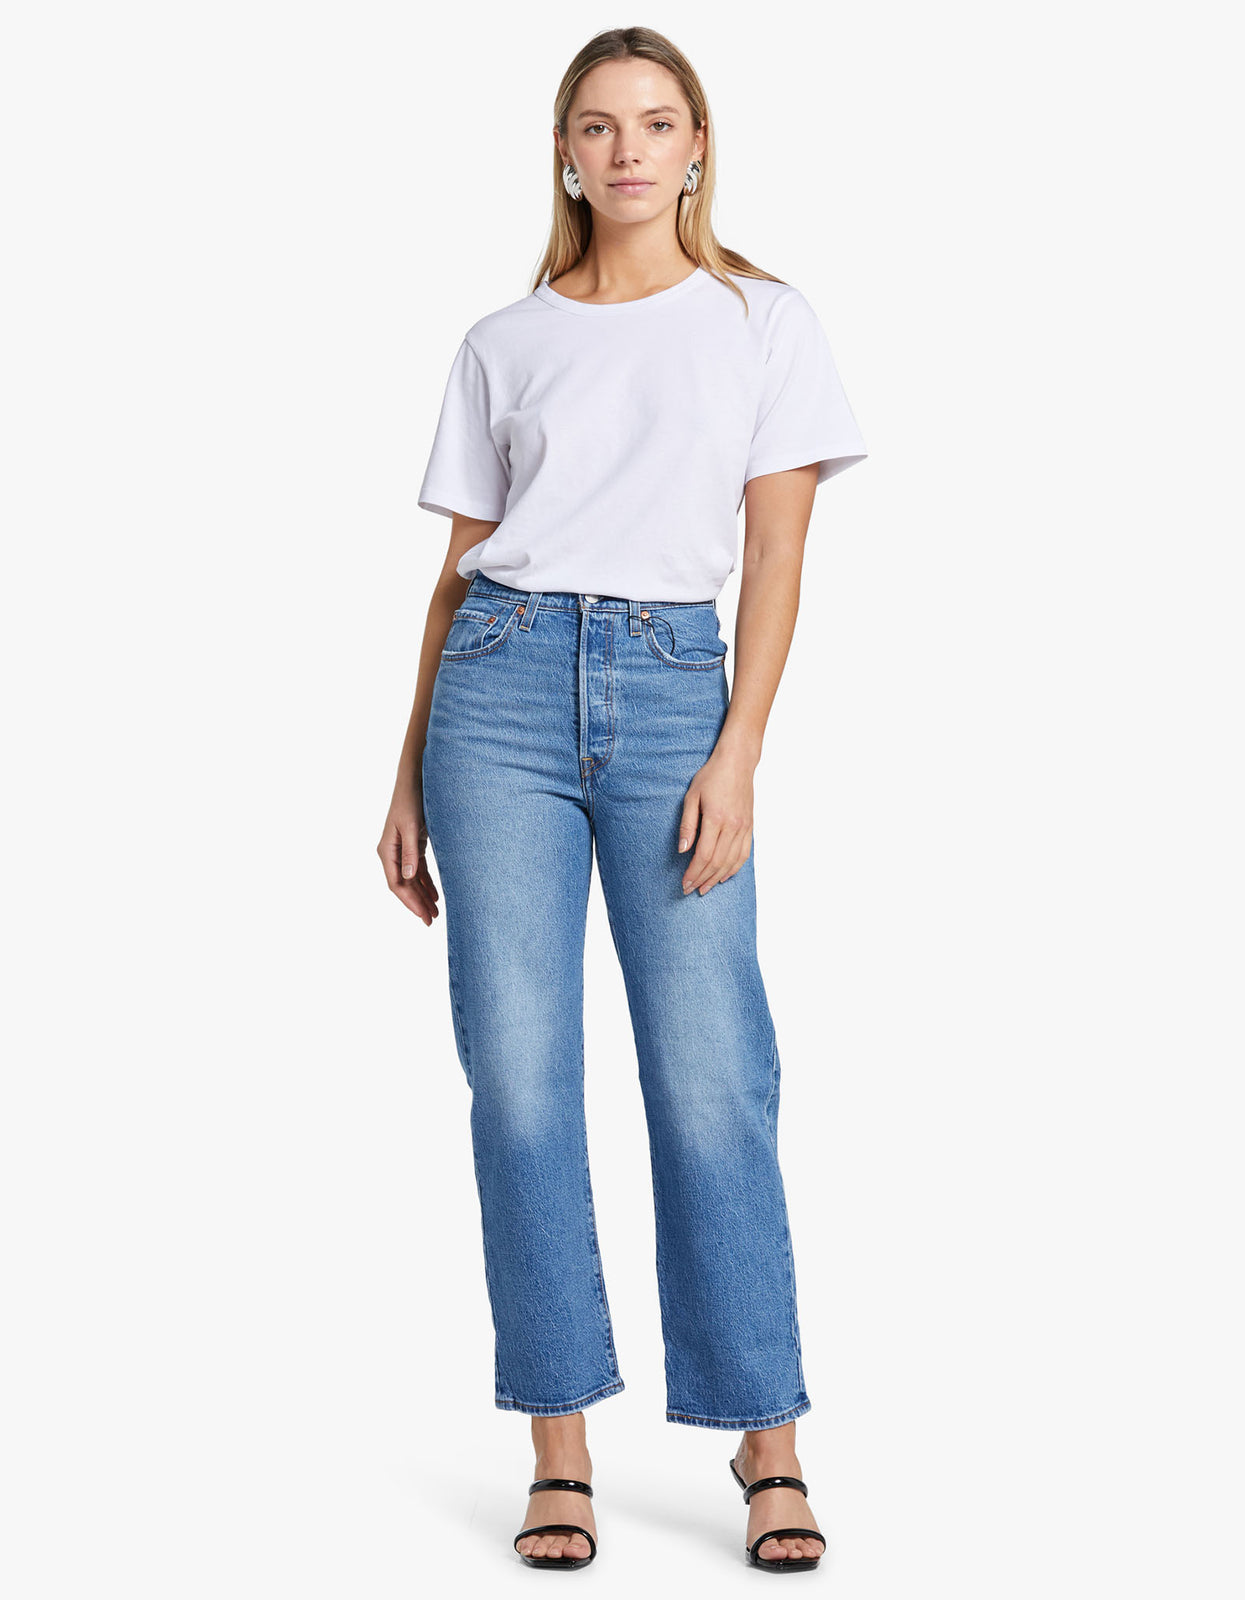 Levi's Ribcage Straight Ankle Jeans Neo Dark  Levis ribcage straight ankle  jeans, Ribcage straight ankle jeans, Levi